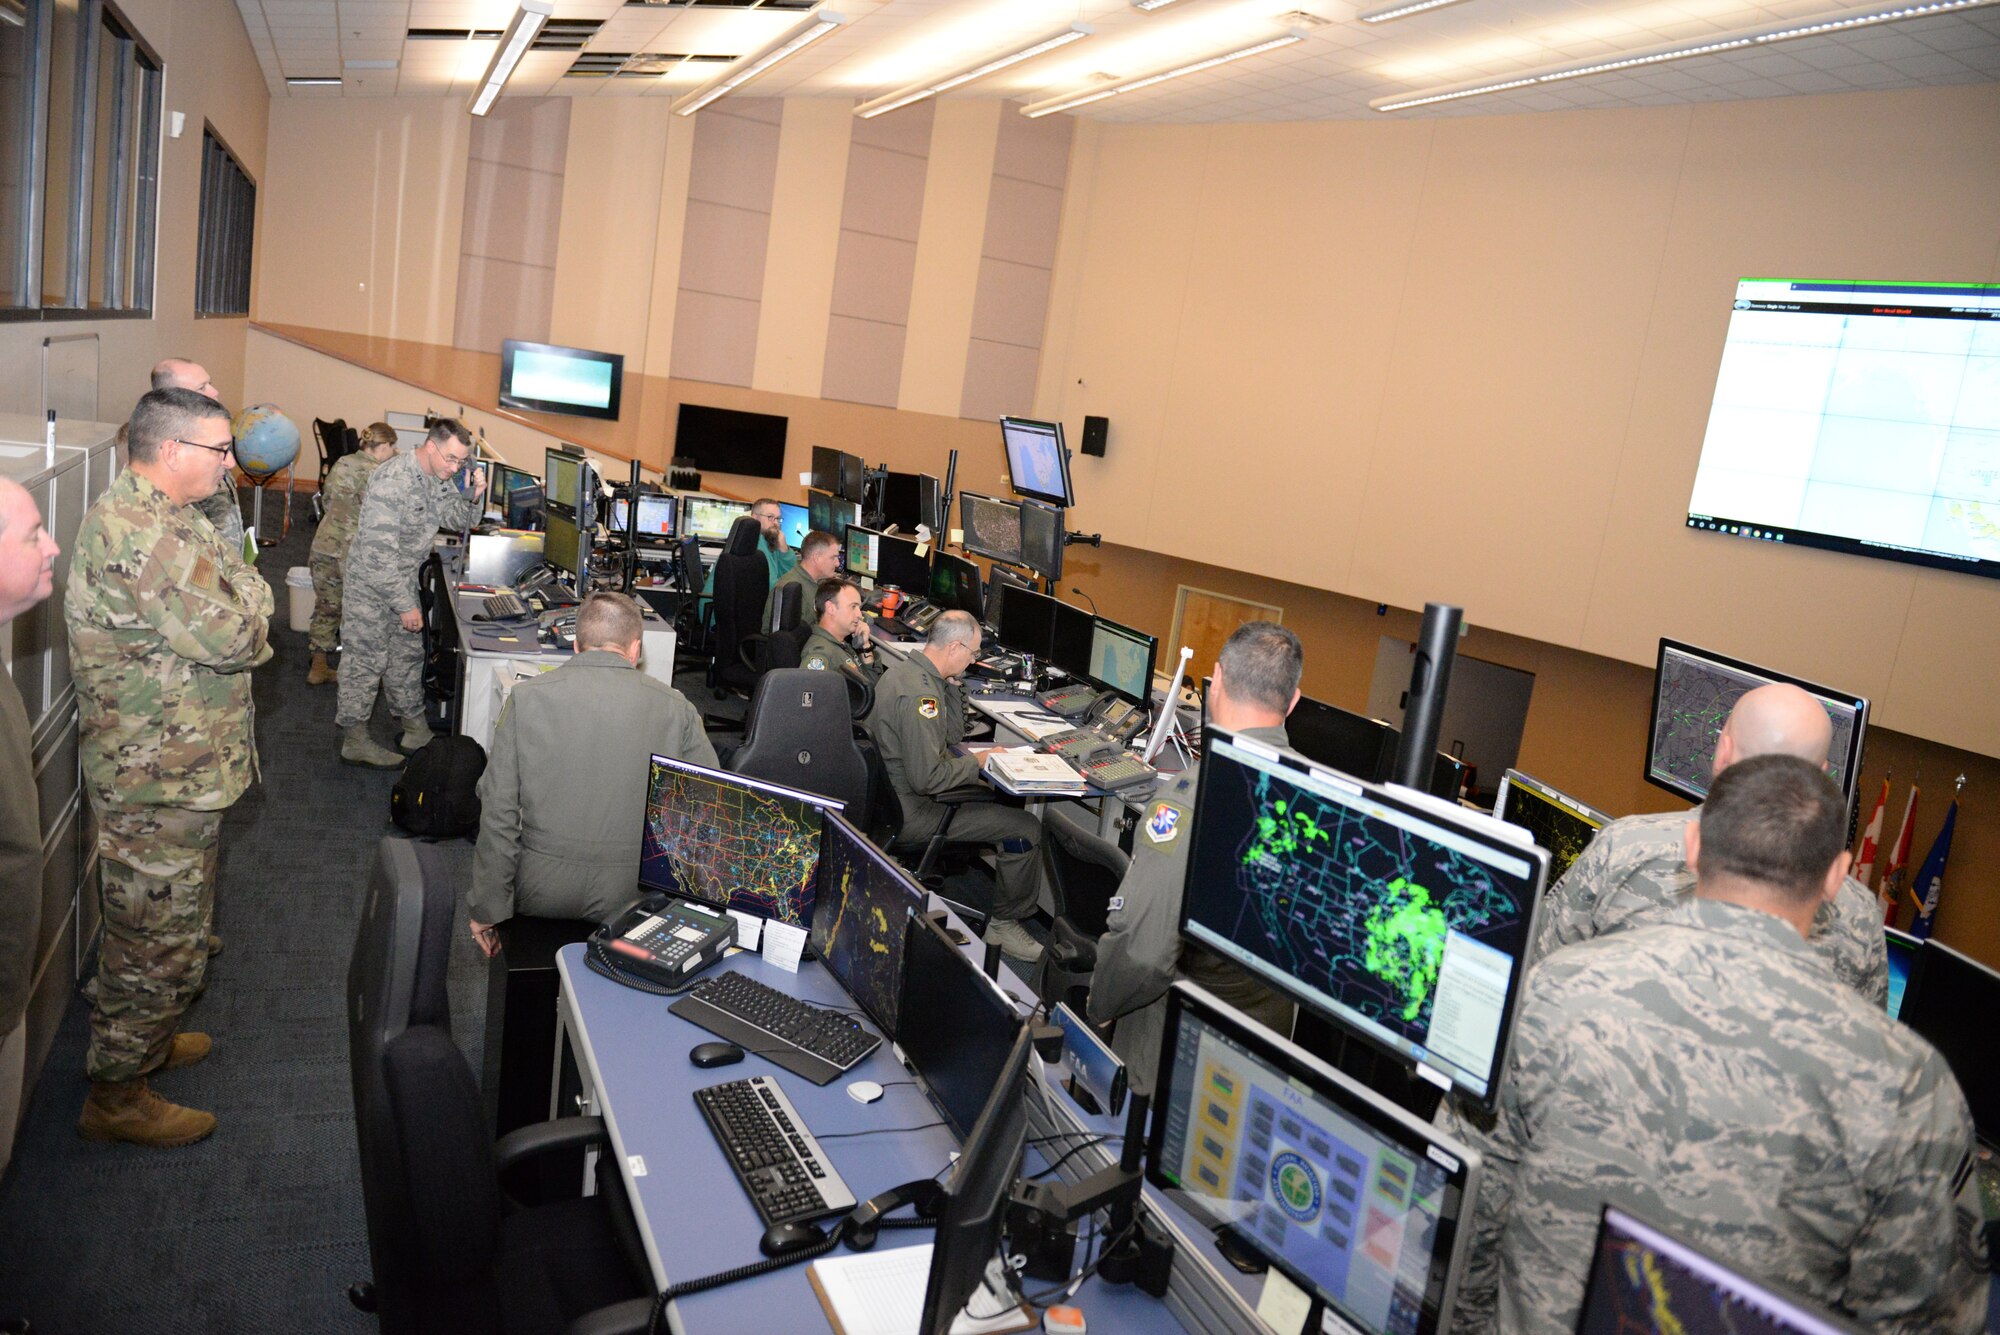 After 72 days operating from an alternate location due to Hurricane Michael, operations resumed Thursday evening at the Continental U.S. NORAD Region’s 601st Air Operations Center. (U.S. Air National Guard photo by Maj. Andrew Scott)